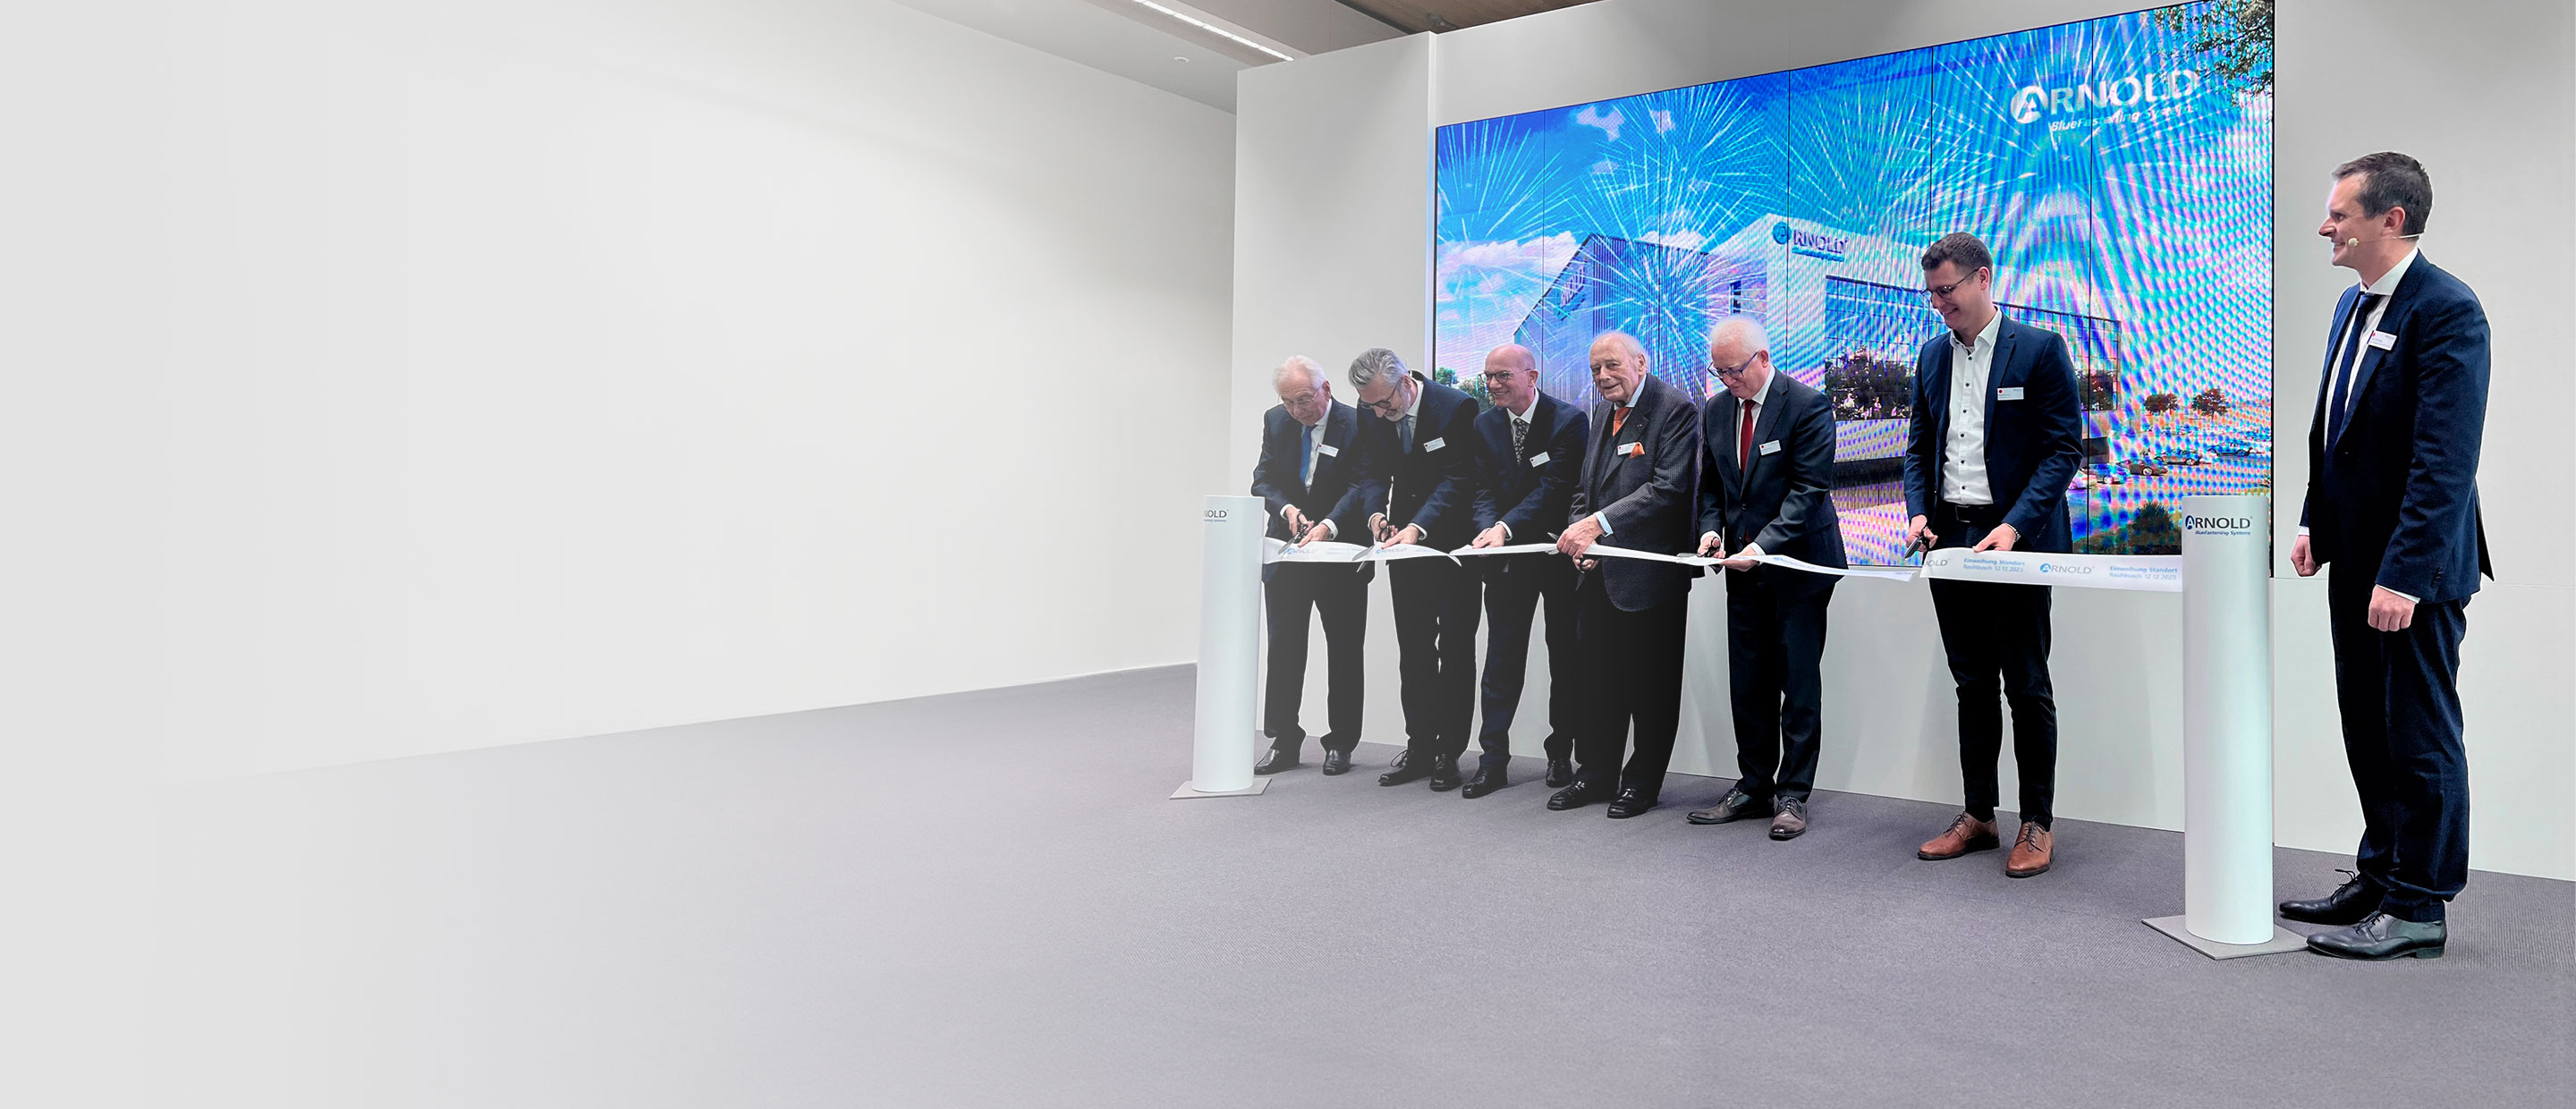 ARNOLD UMFORMTECHNIK expands: Inauguration ceremony for the ultra-modern production facility in Forchtenberg